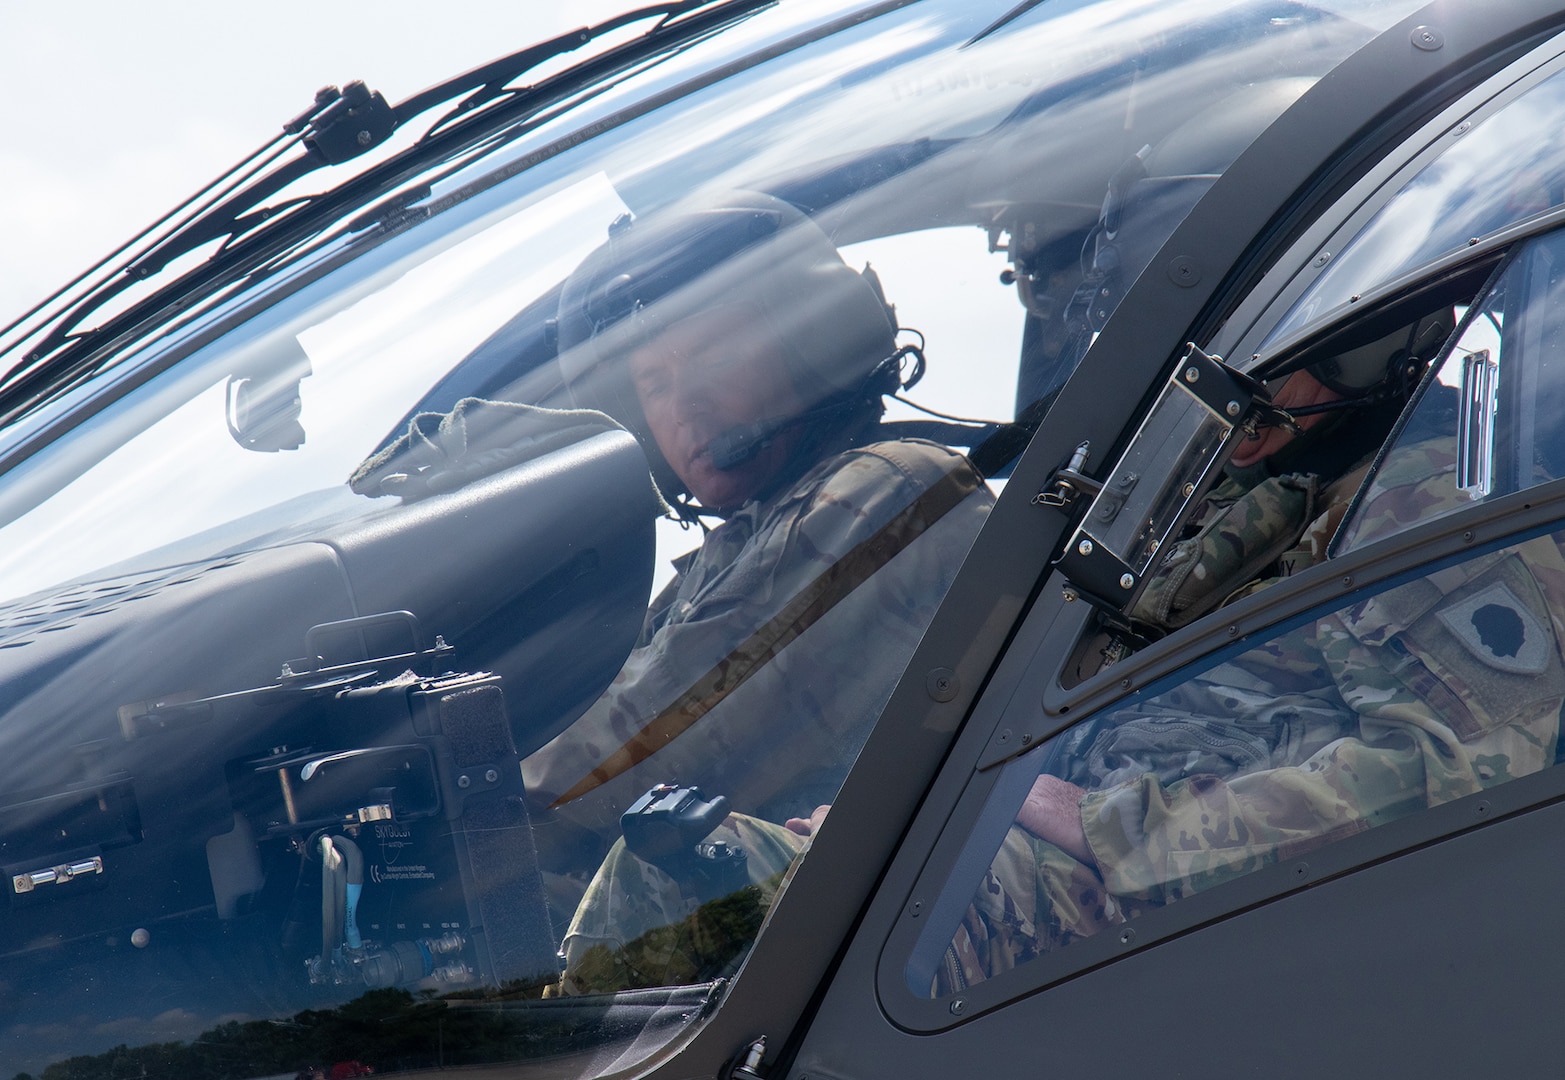 Illinois Army National Guard Chief Warrant Officer 4 Josh Perrott prepares for take off of his final flight as an Army aviator Aug. 3 at the Army Aviation Support Facility in Decatur, Illinois. Perrott, who retires Nov. 1, has served 31 years in the Illinois Army National Guard.